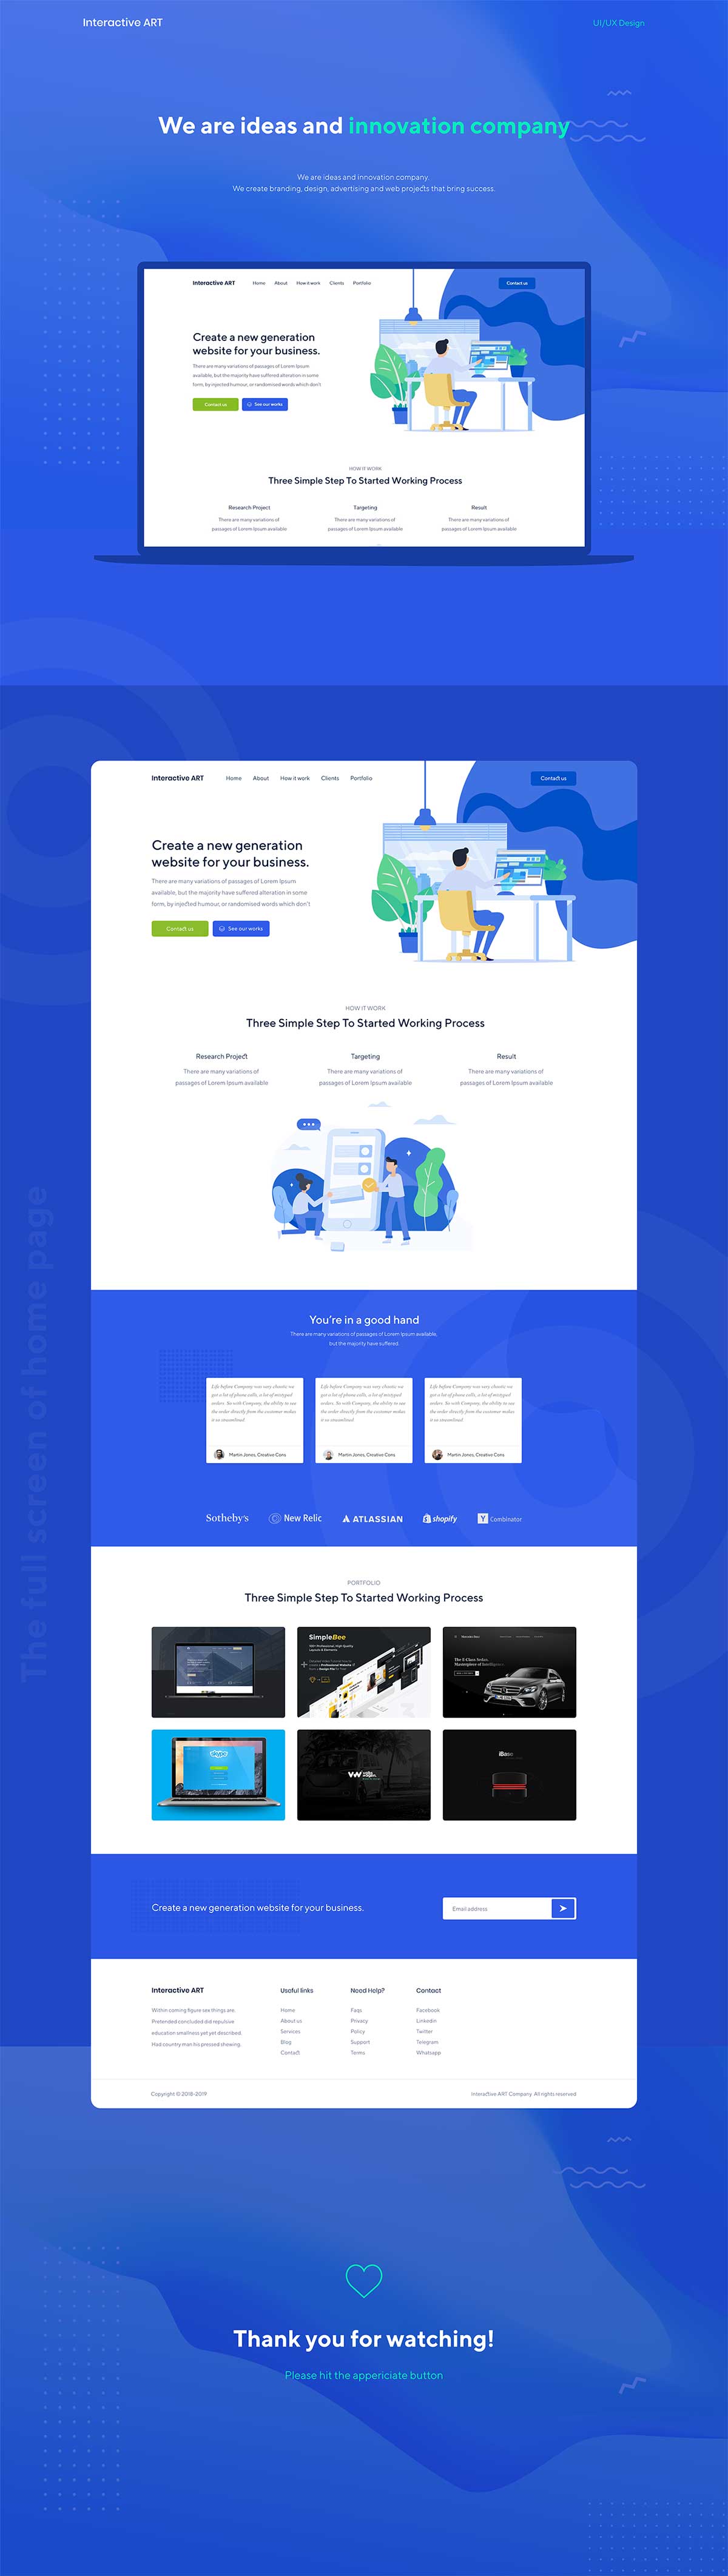 Innovation Company Website Design Template Free Download